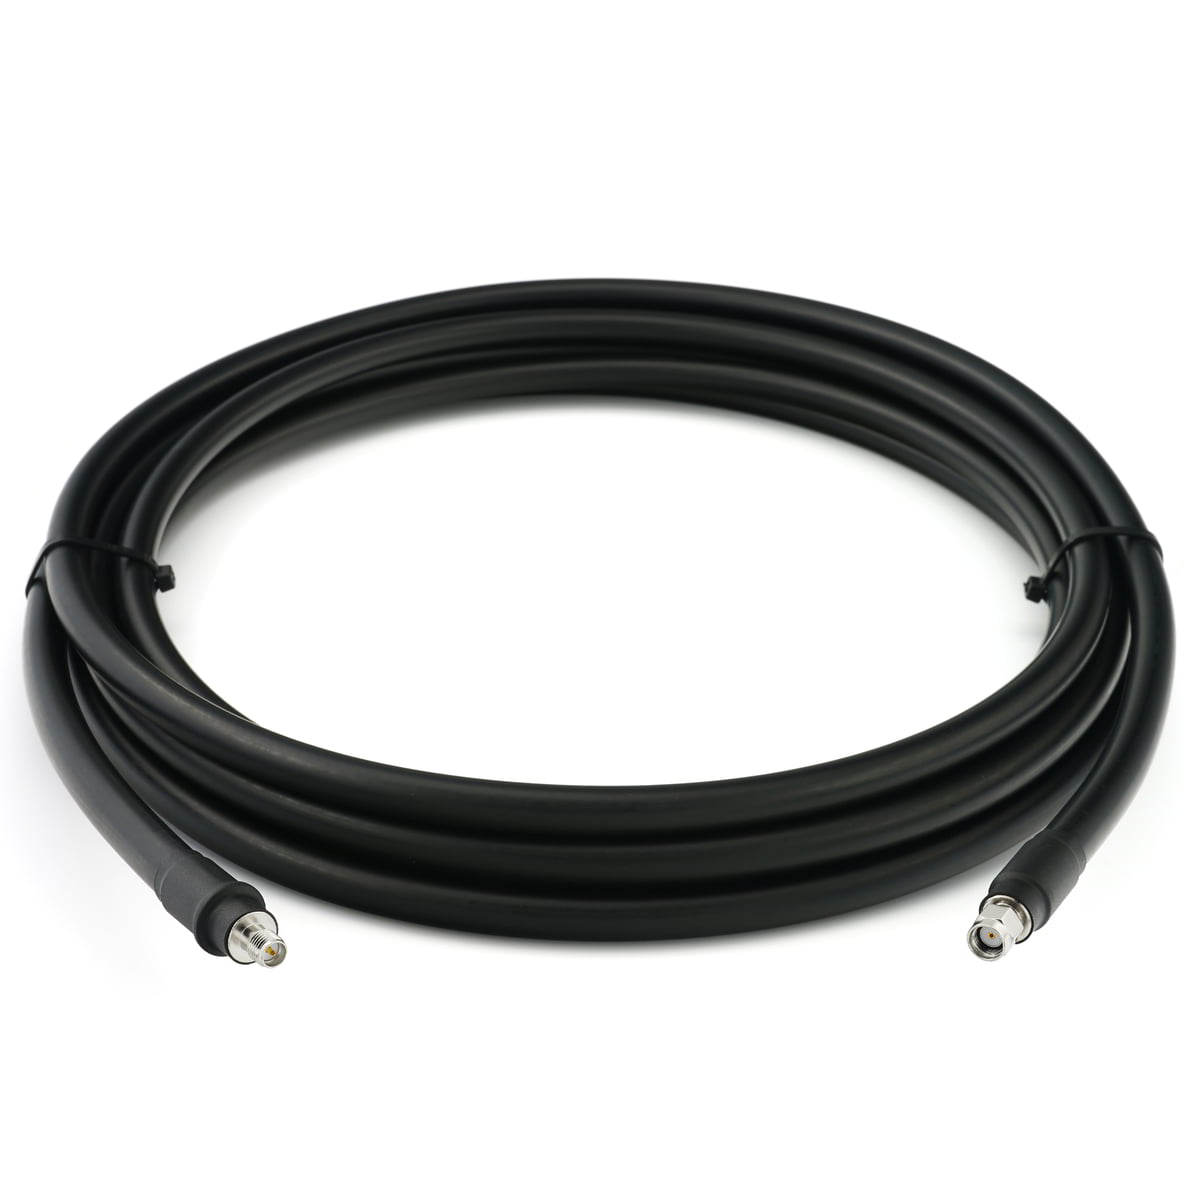 8D-FB RP-SMA Male - RP-SMA Female Coaxial Cable